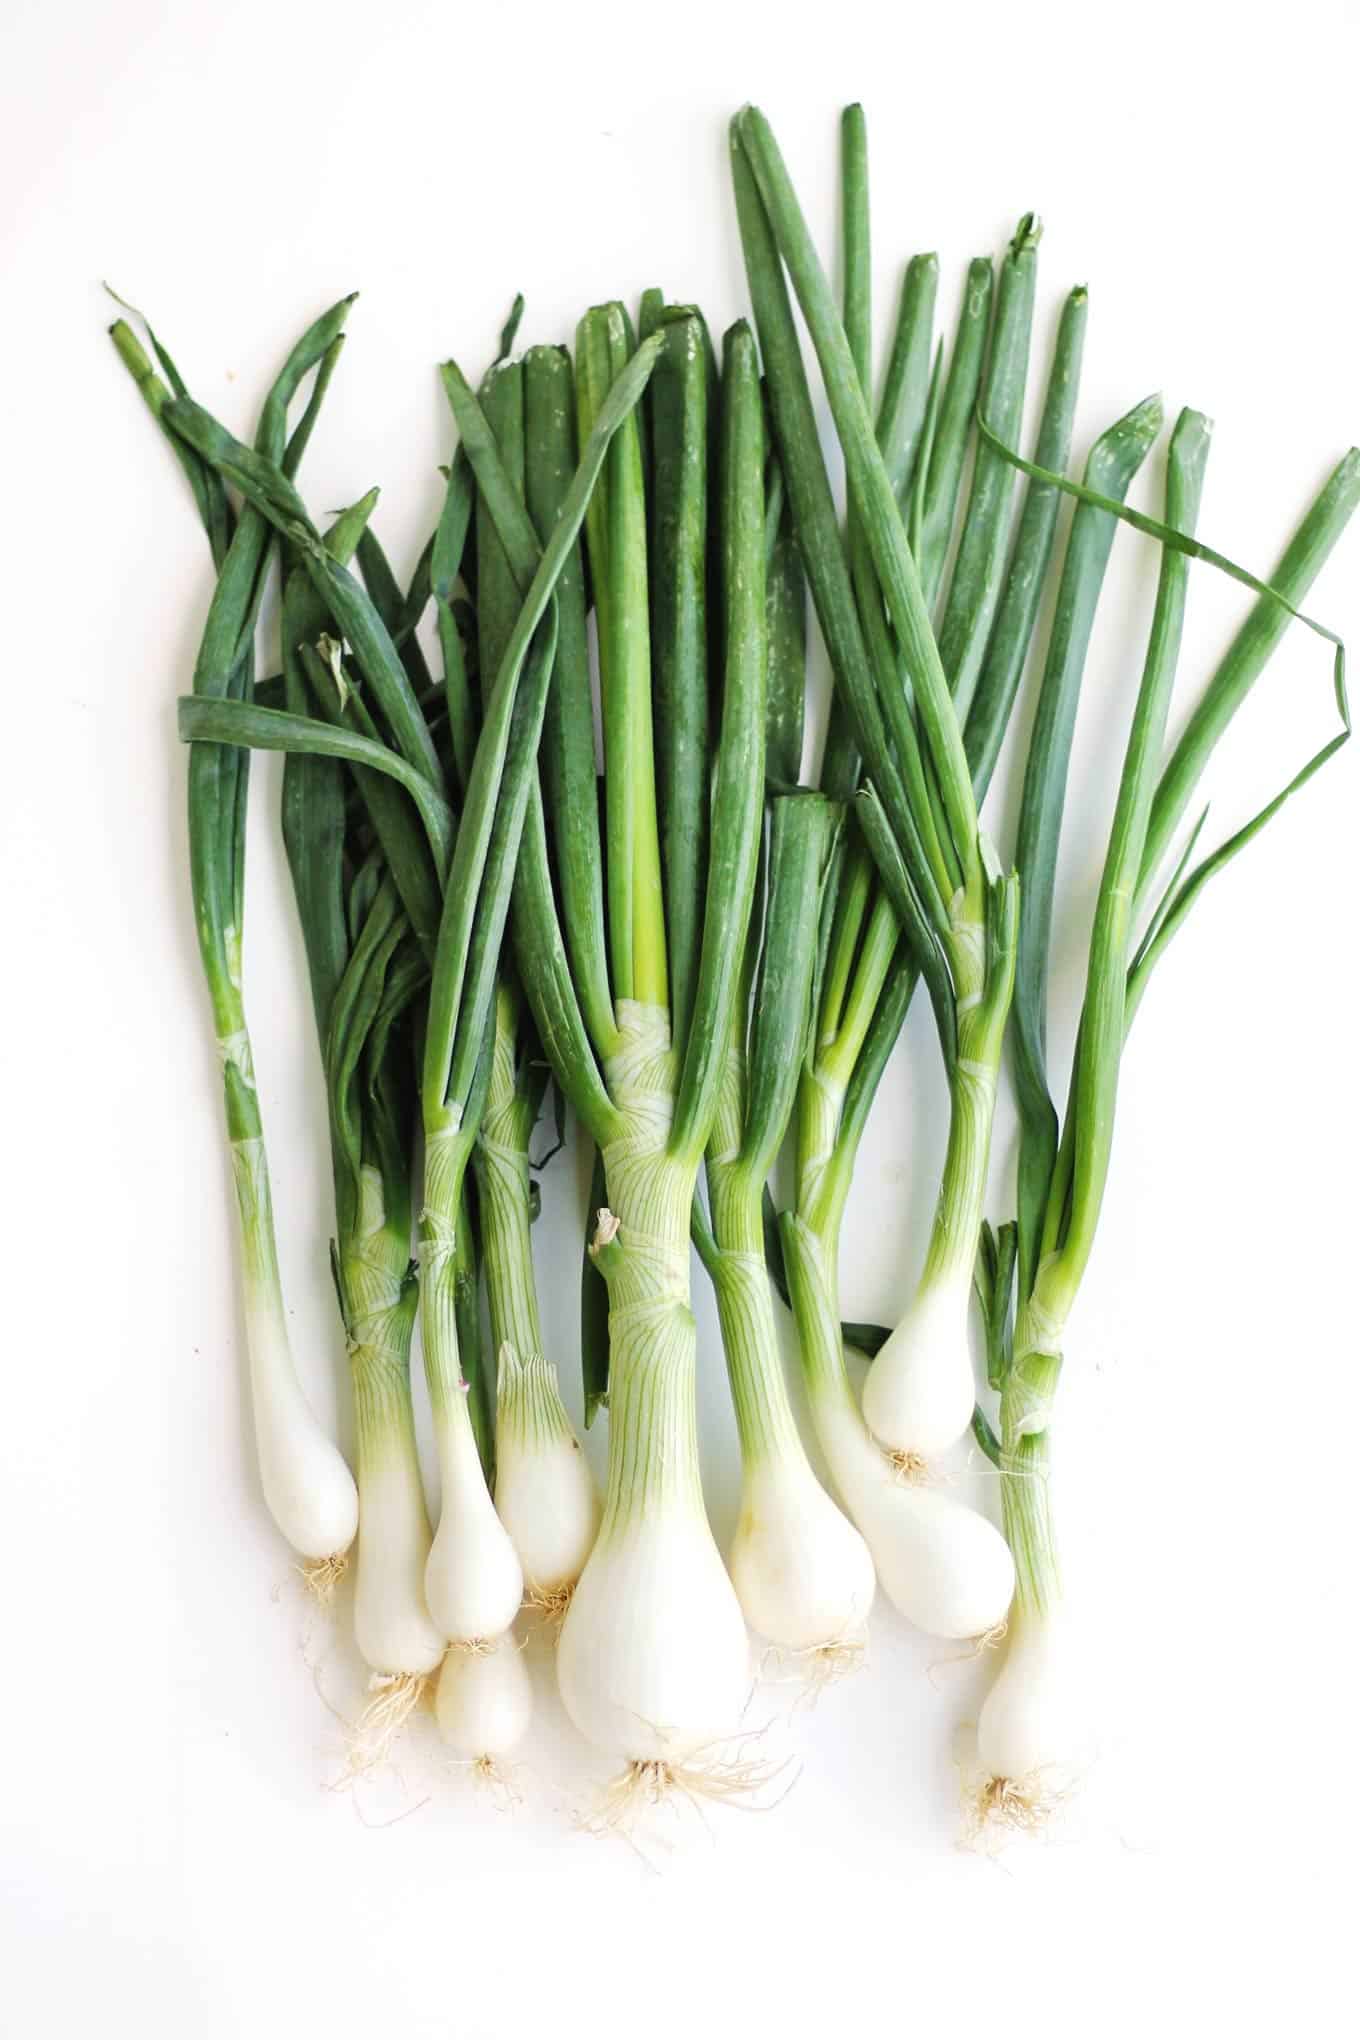 Spring onion photography